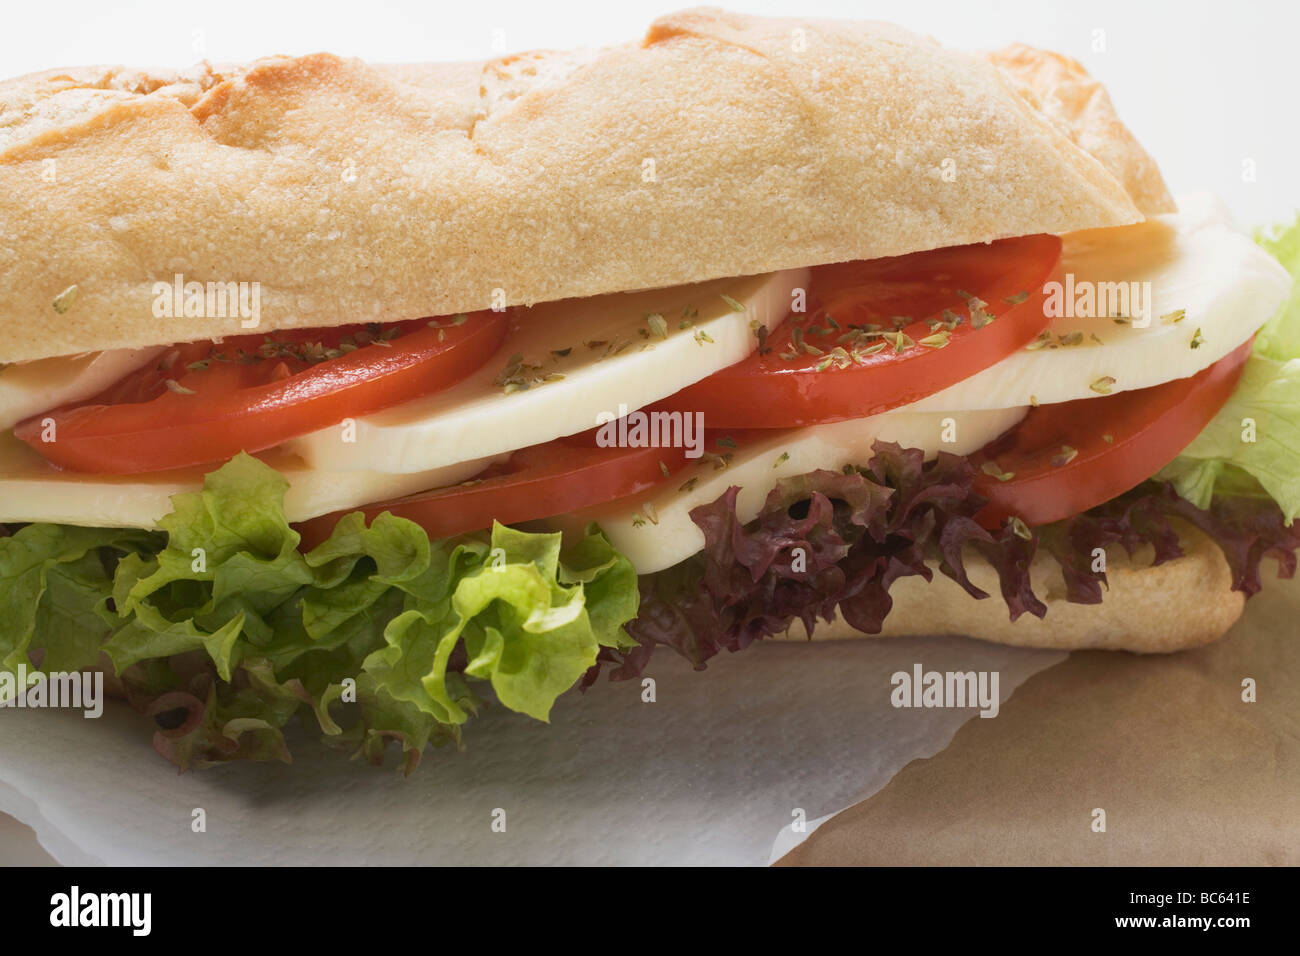 Baguette roll filled with mozzarella and tomato - Stock Photo